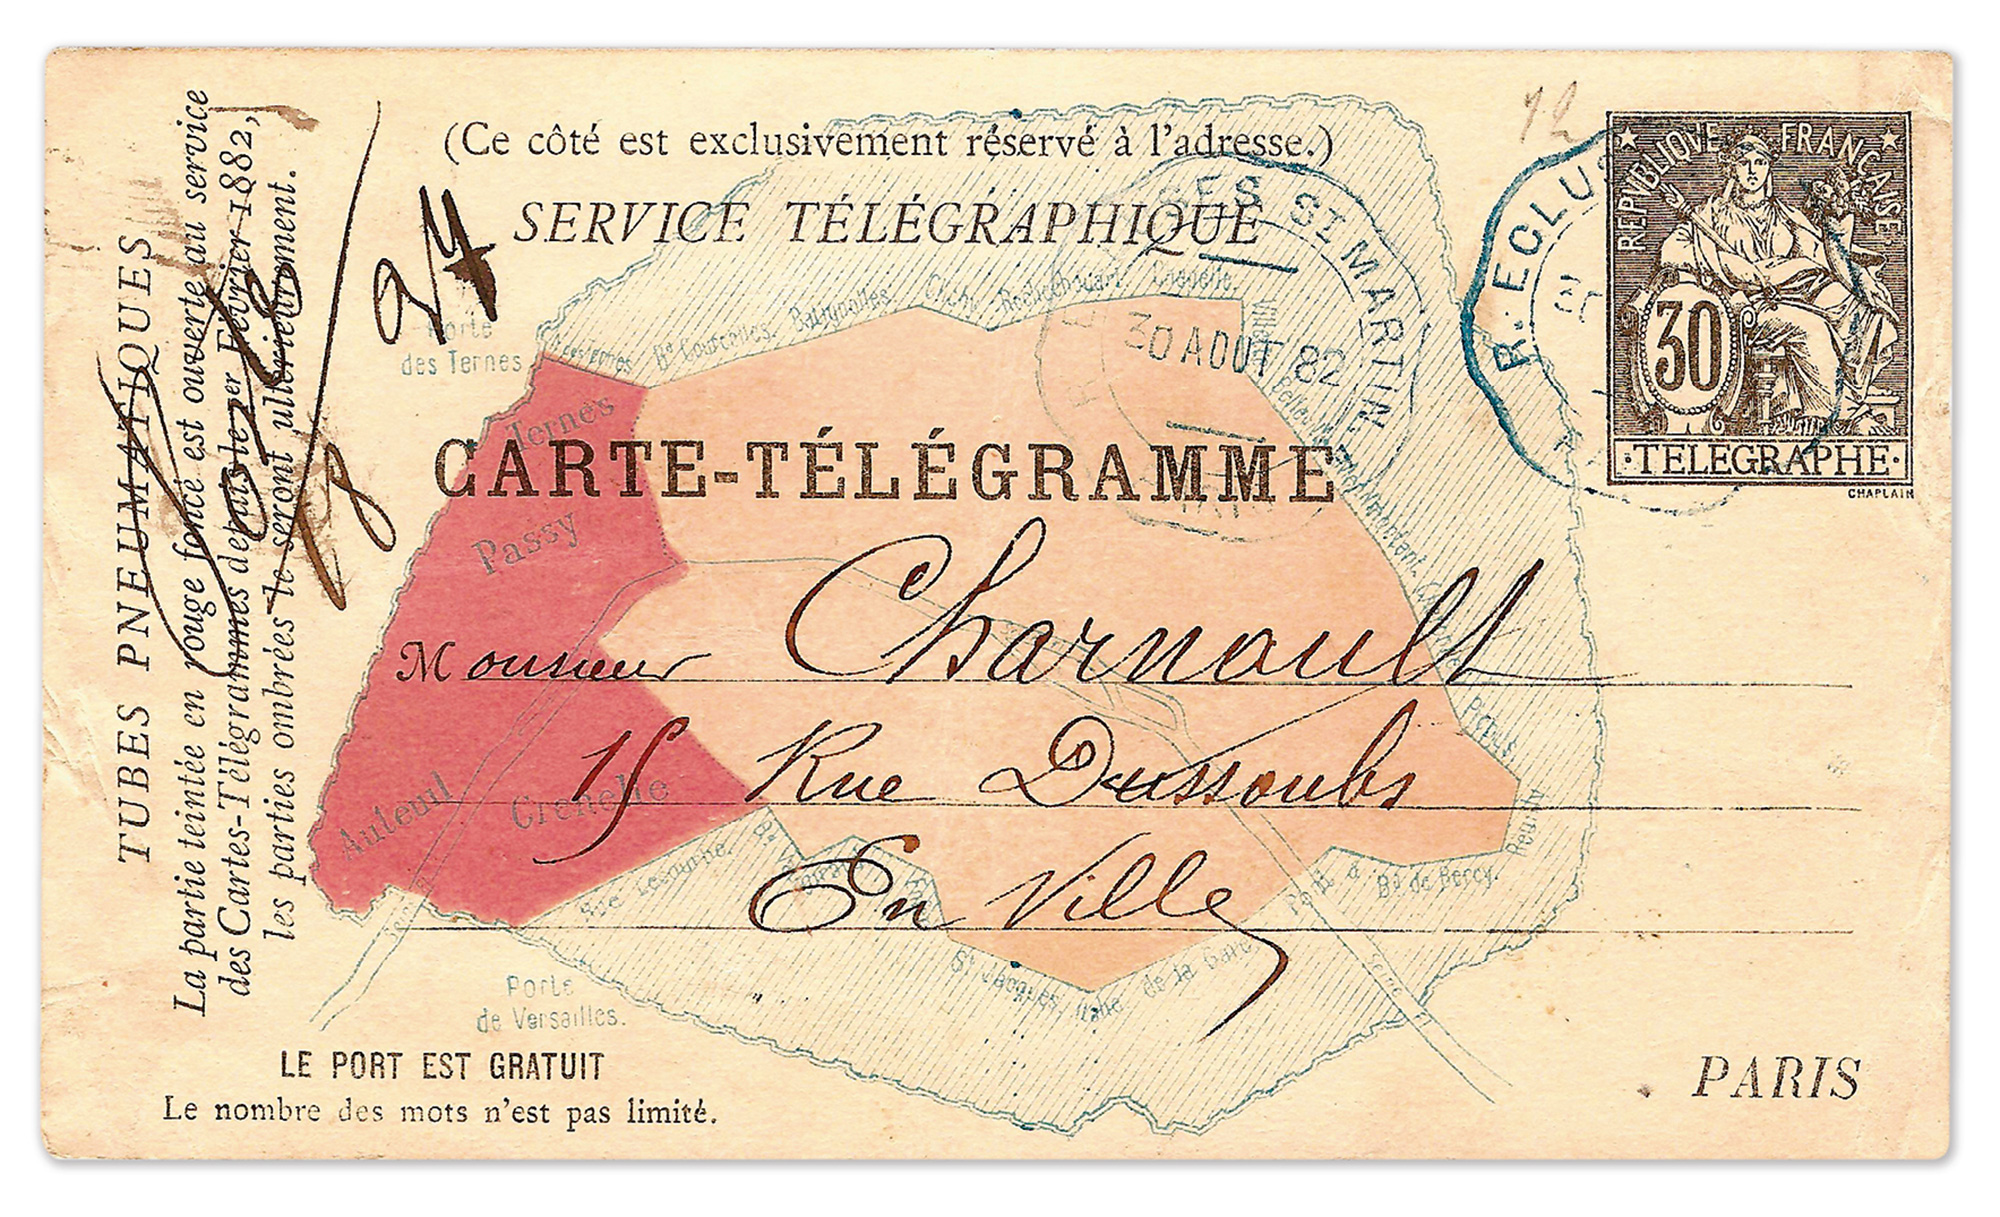 Piece of mail delivered by pneumatic post, August eighteen eighty-two. The map of Paris shows in red an area of the city that had begun to receive the service earlier that year. A legend at bottom left states that there are no limits to the number of words that the sender can write on the reverse.